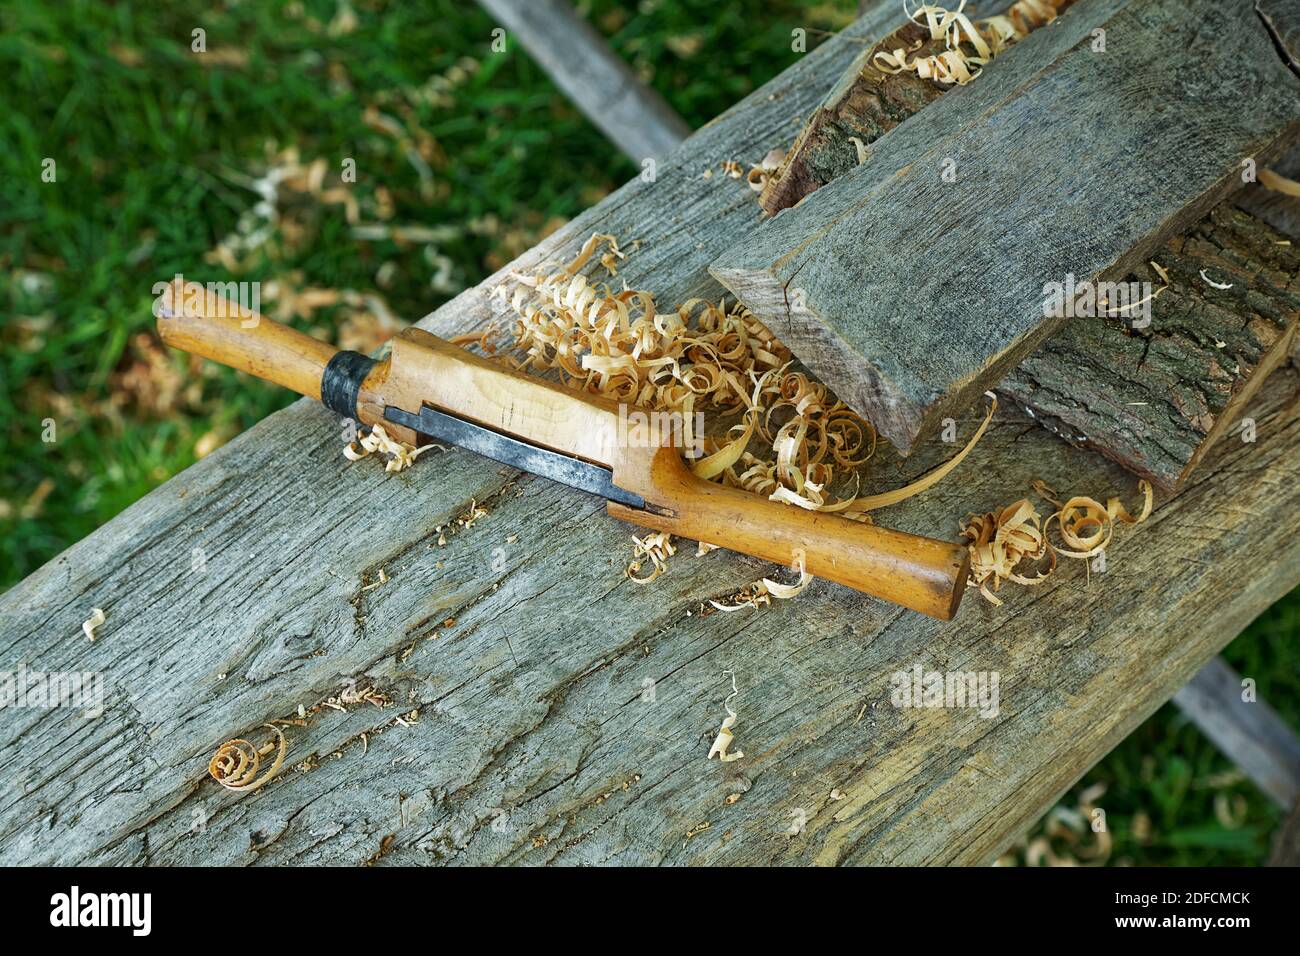 Spoke shave wood working tool. Stock Photo